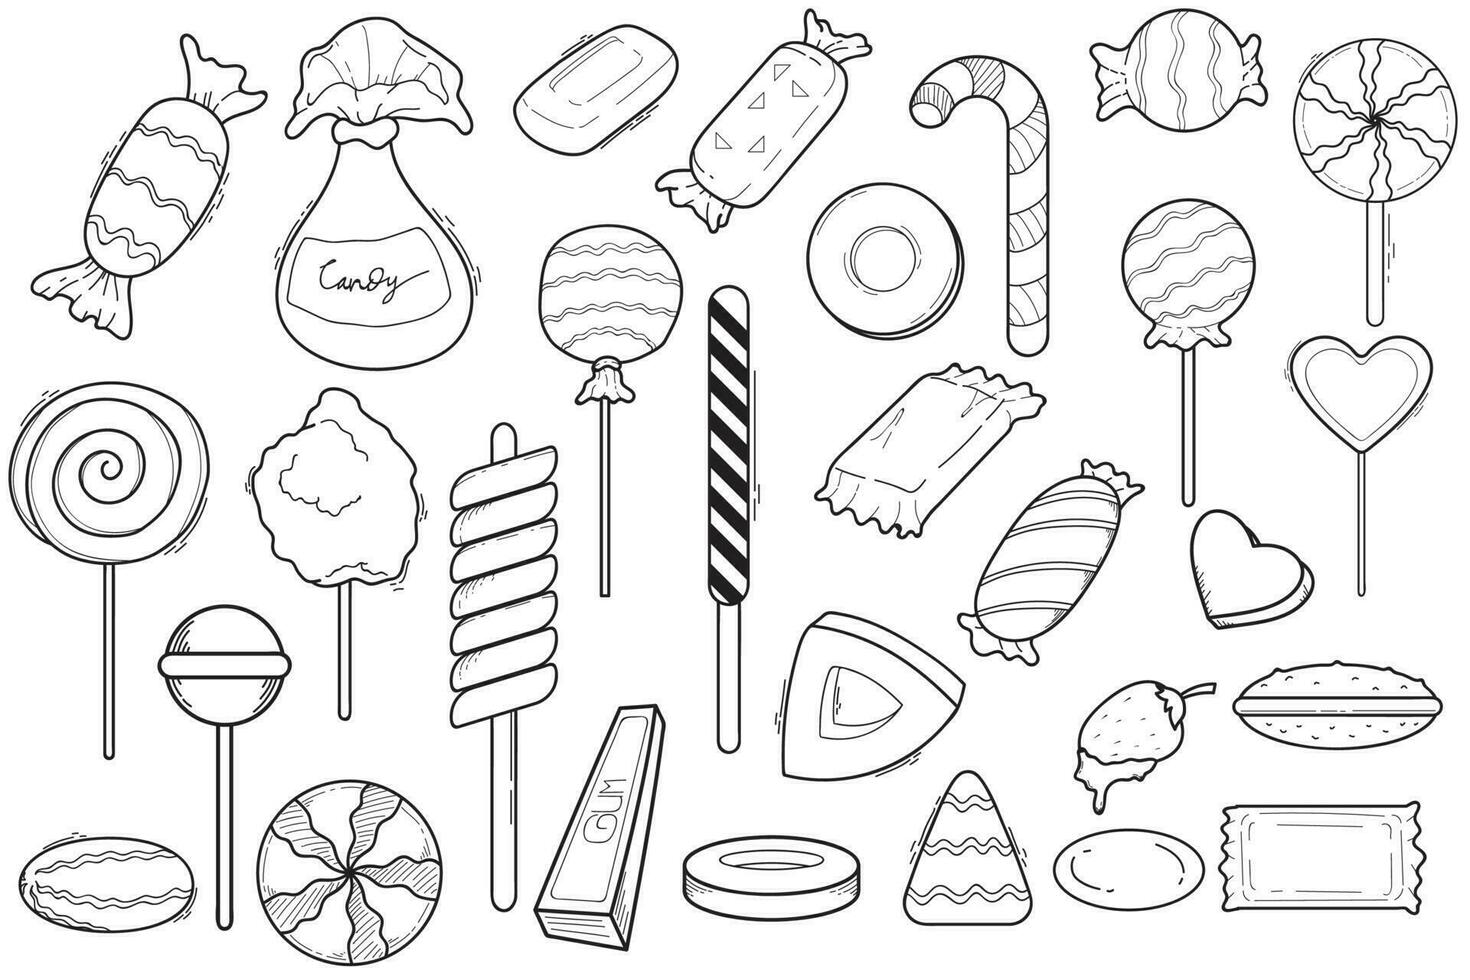 Set of hand drawn doodle illustrations candy vector